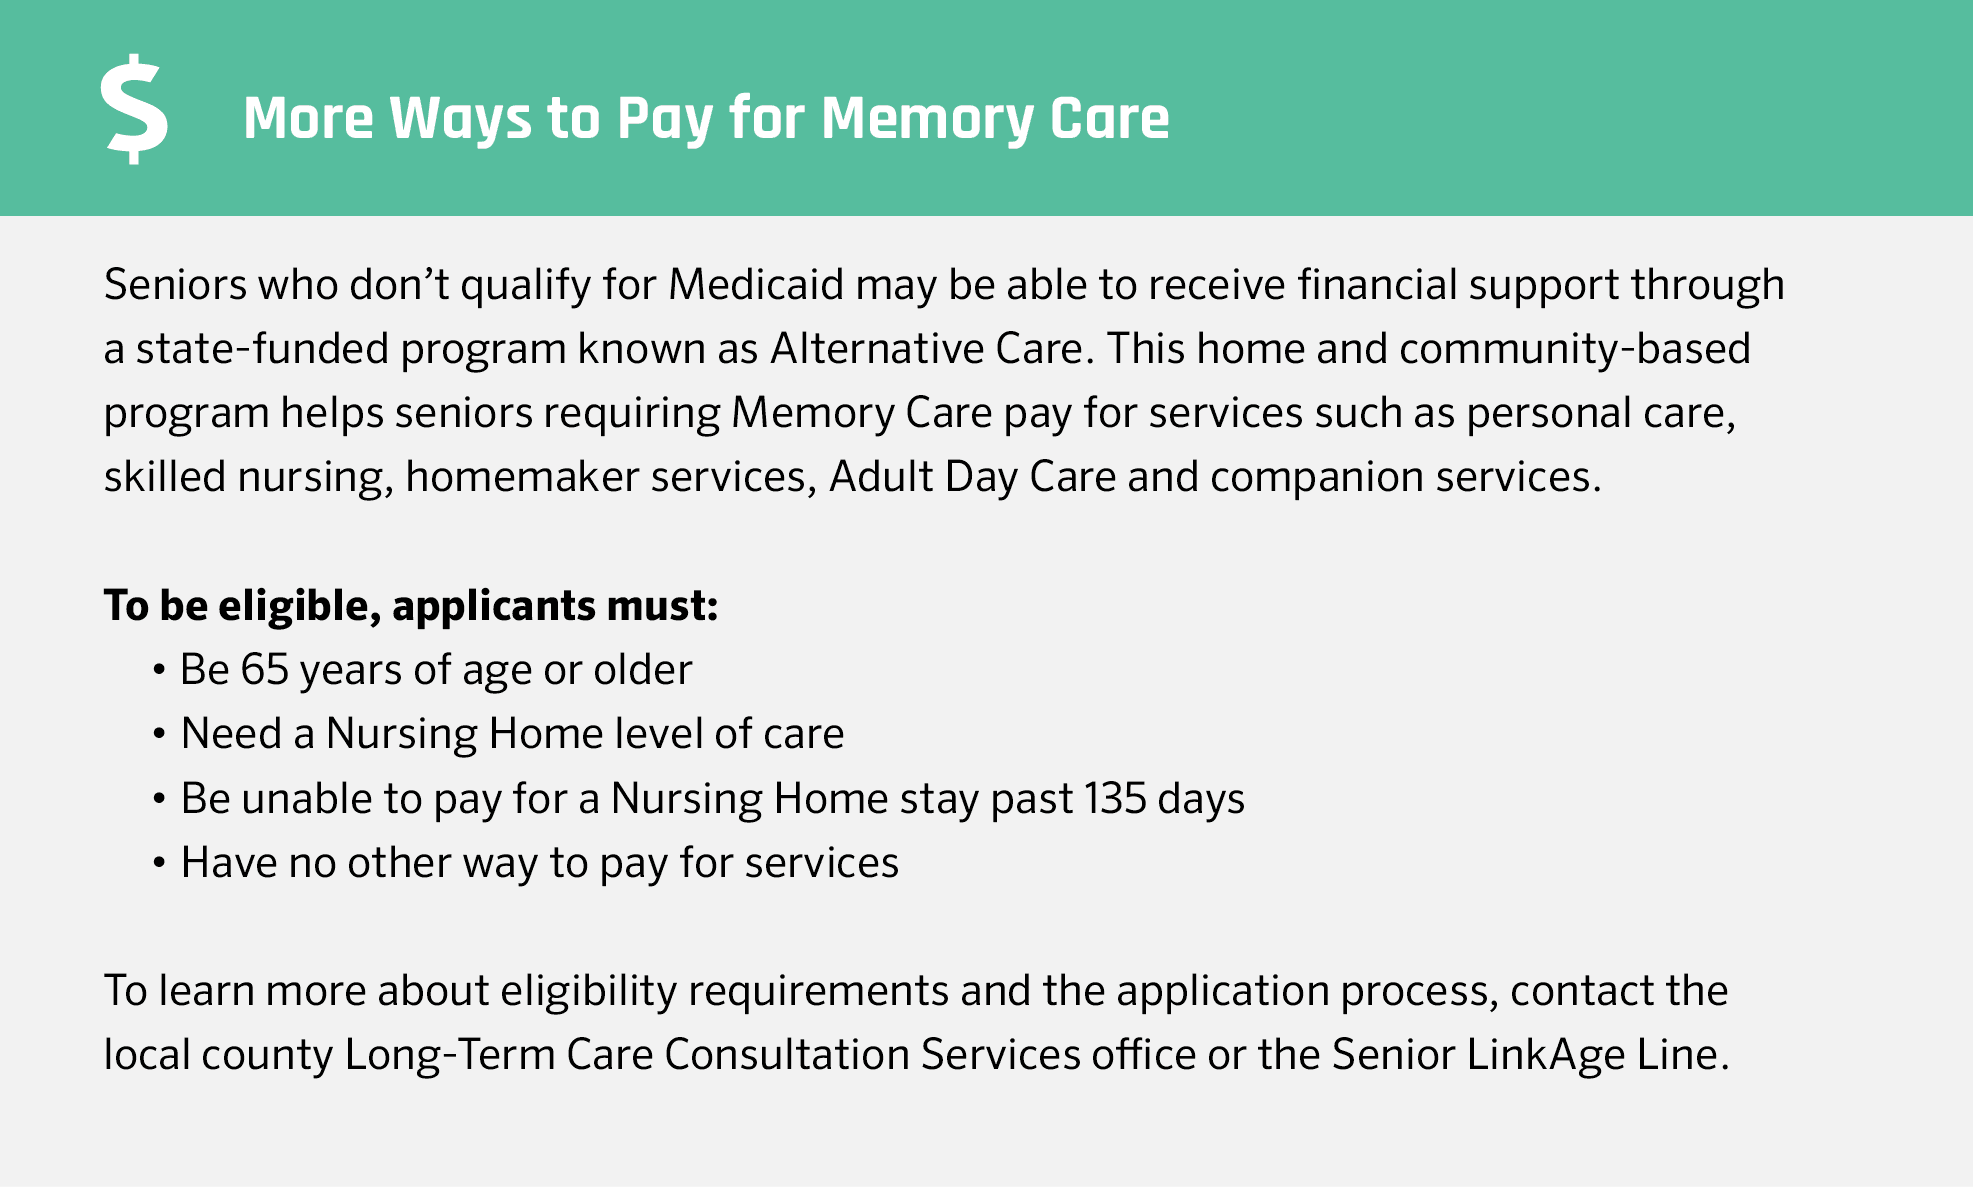 Financial Assistance for Memory Care in Minnesota